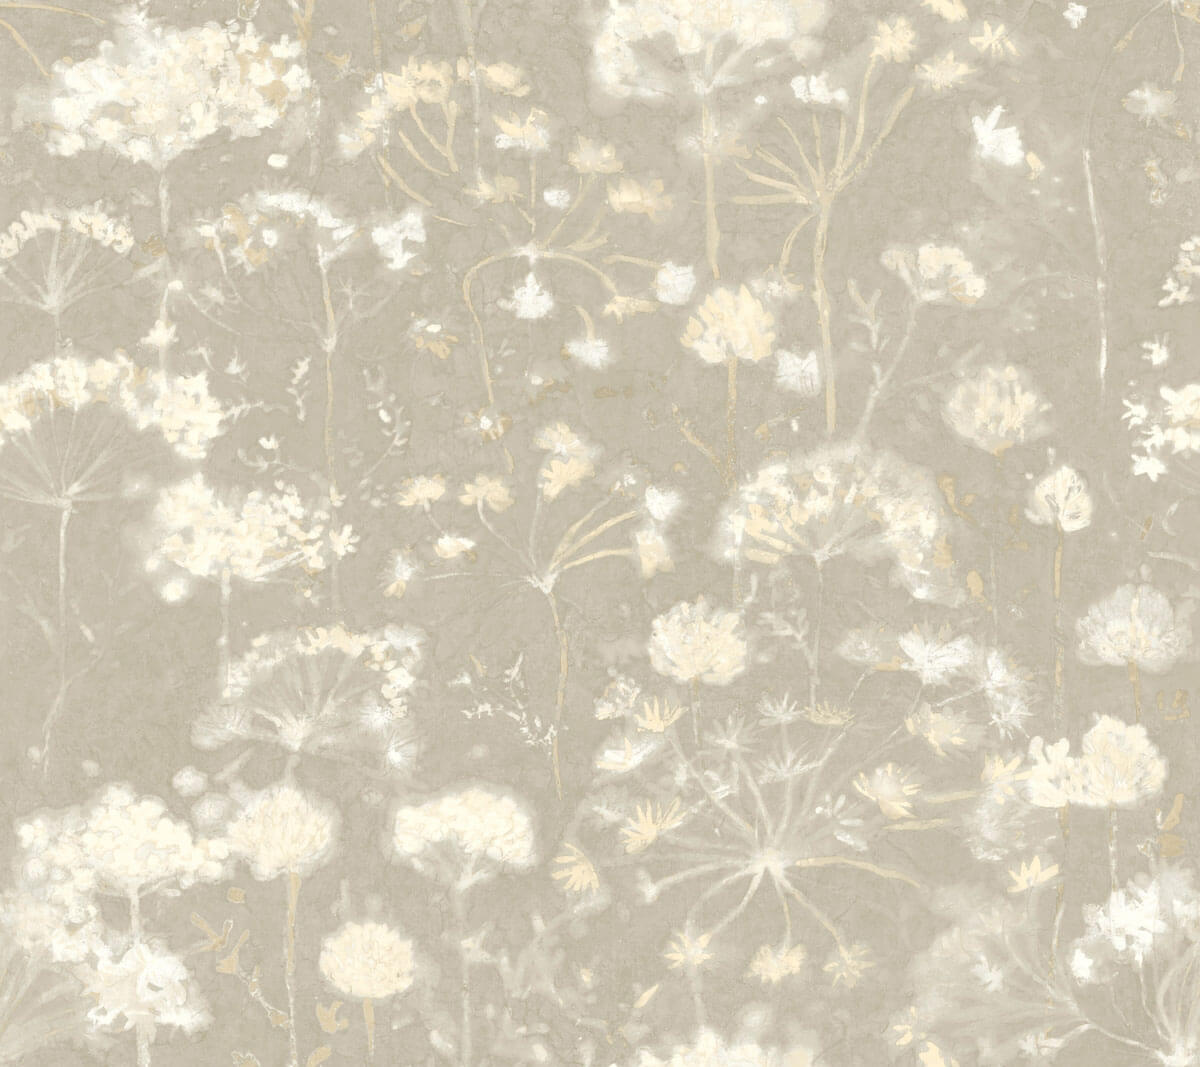 Botanical Fantasy Wallpaper by Candice Olson - SAMPLE ONLY